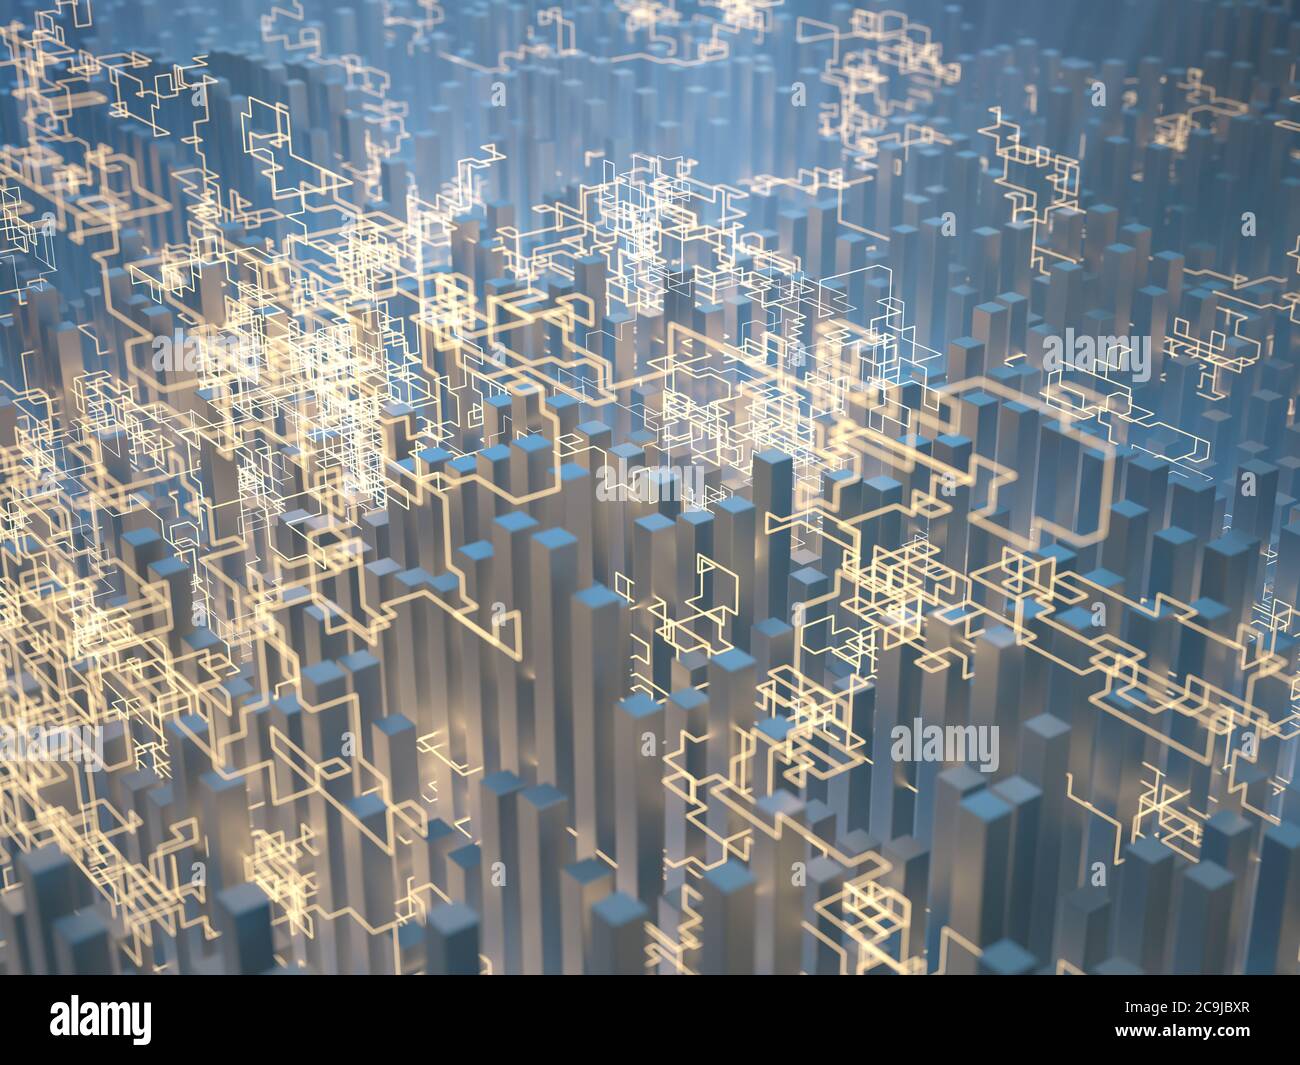 Structural geometric background, illustration. Stock Photo